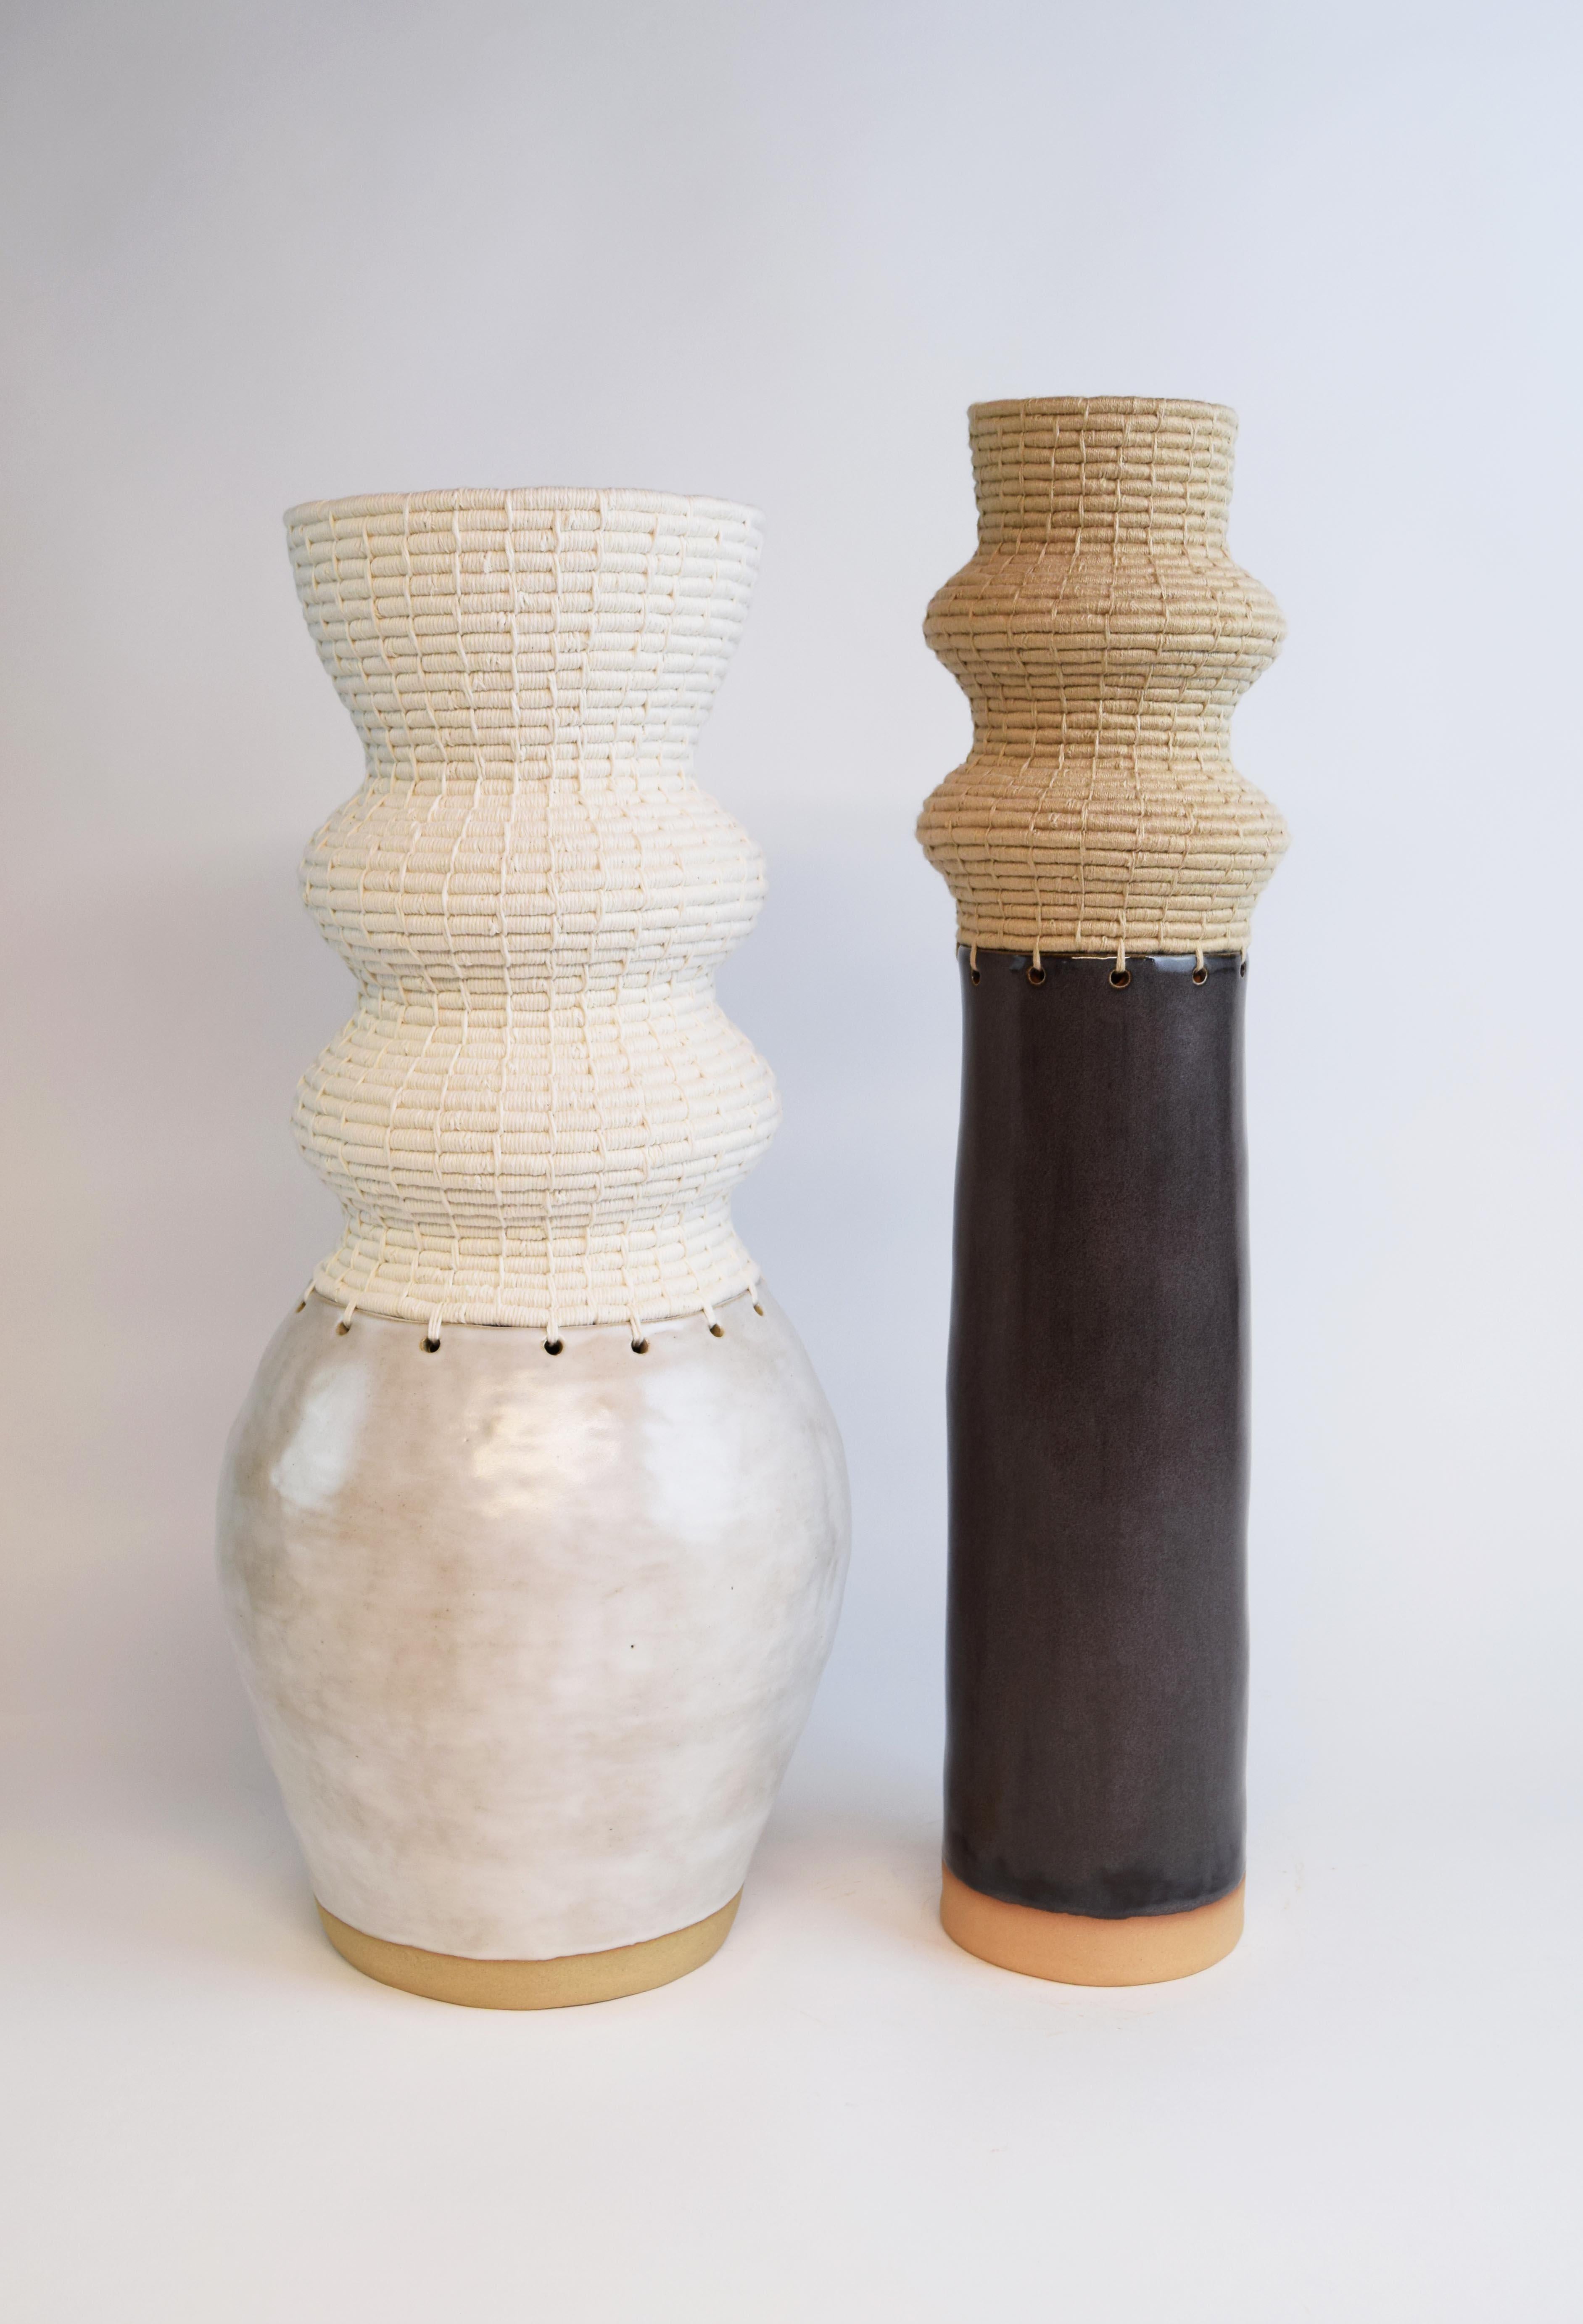 Hand-Crafted One of a Kind Ceramic & Fiber Vessel #814  - Charcoal Glaze & Tan Woven Cotton